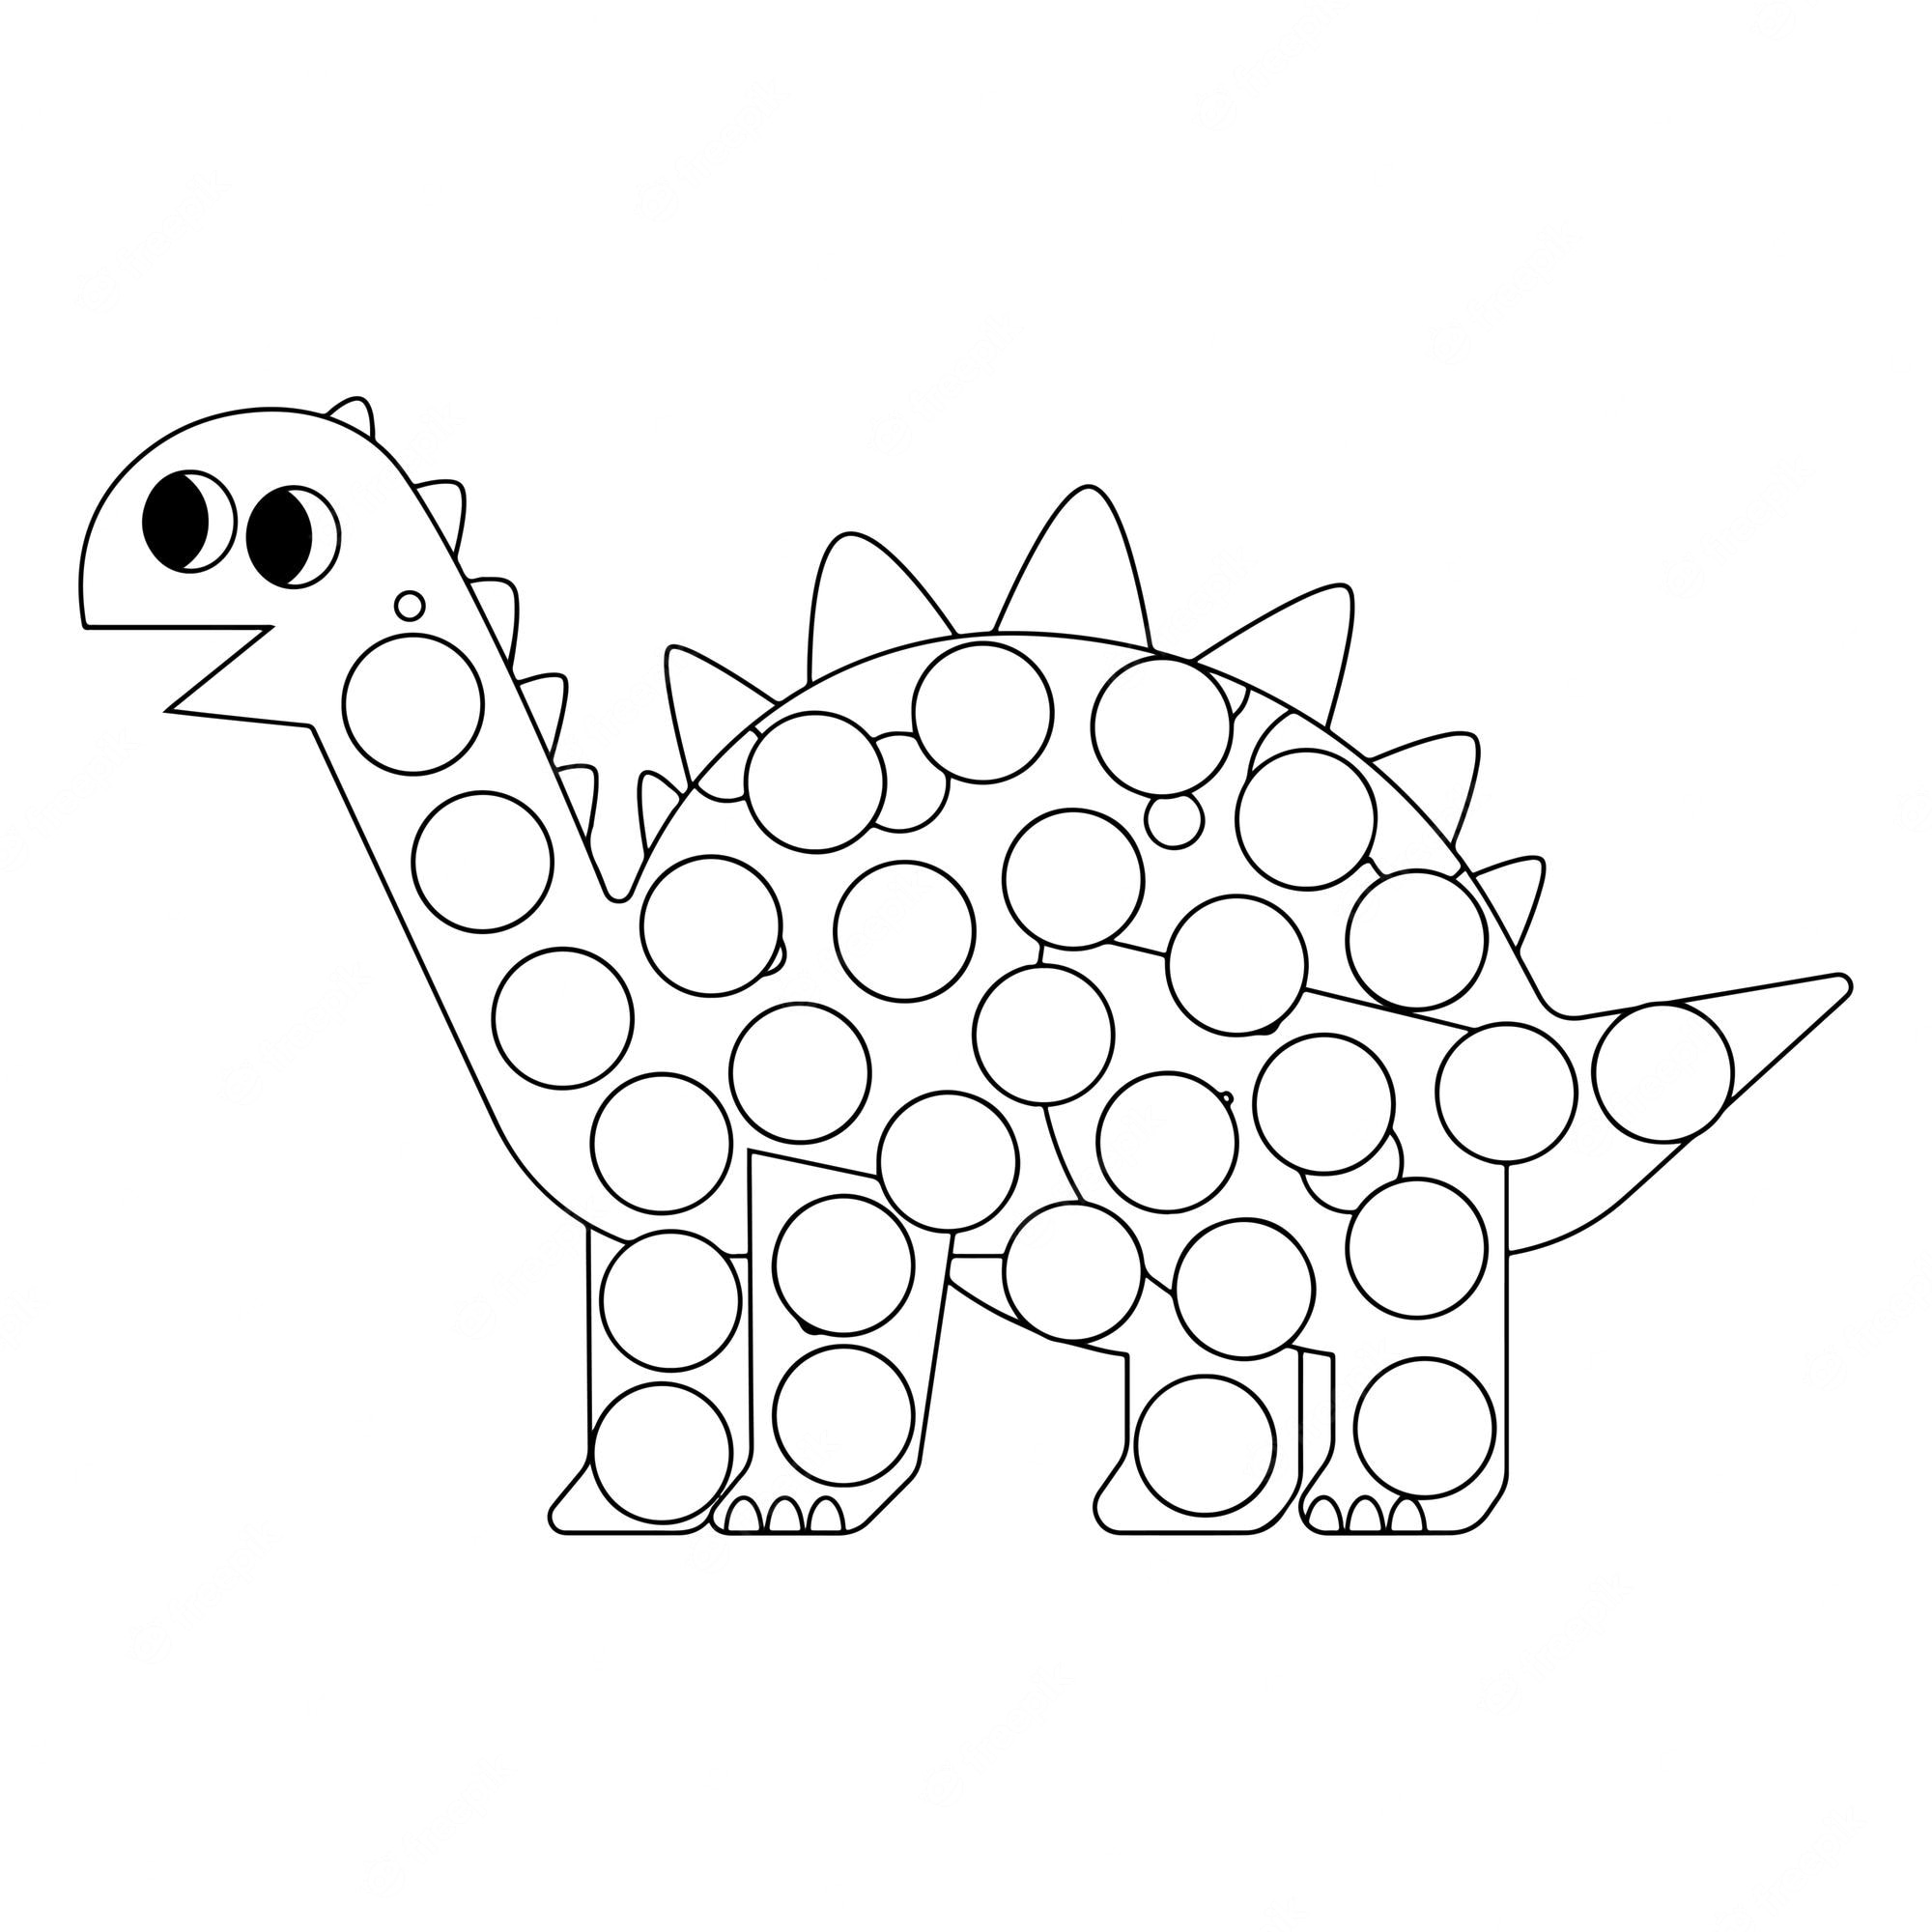 Premium Vector | Dinosaur dot marker coloring pages for kids premium vector